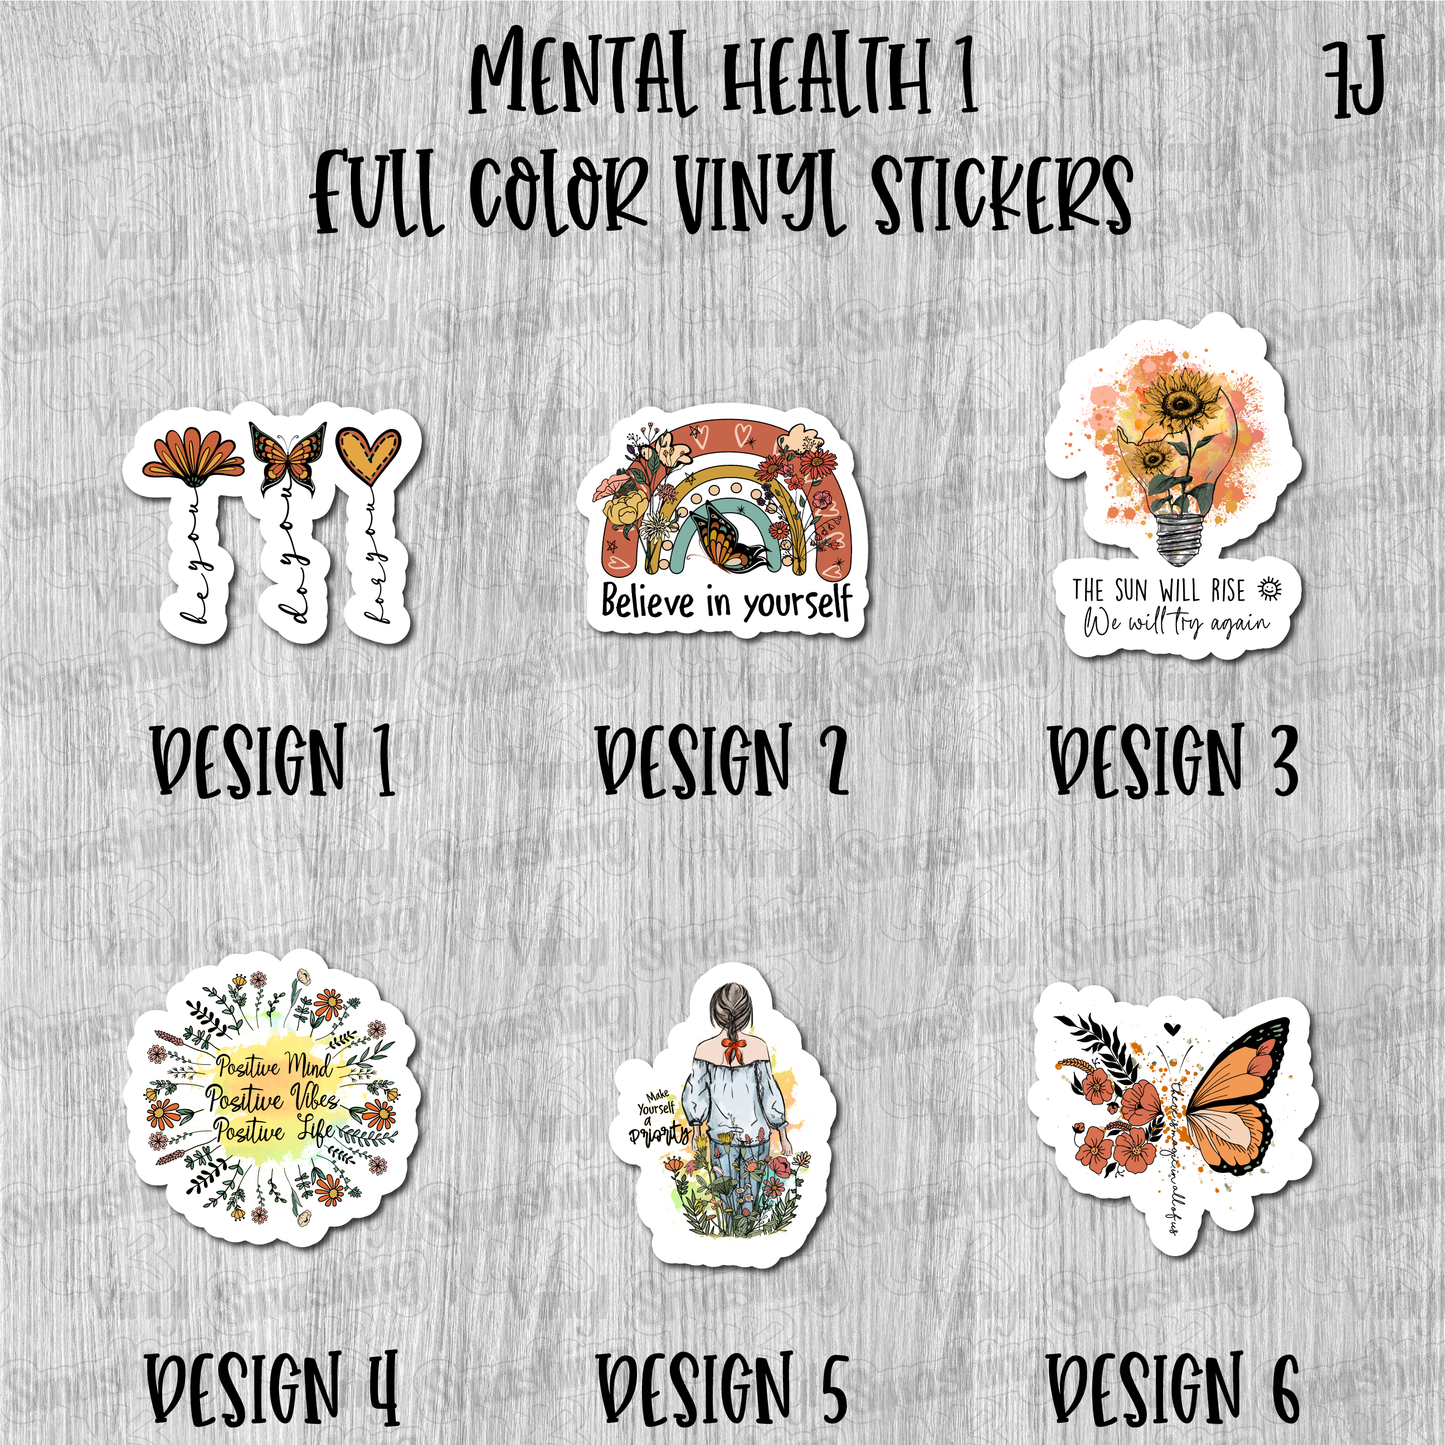 Mental Health 1 - Full Color Vinyl Stickers (SHIPS IN 3-7 BUS DAYS)